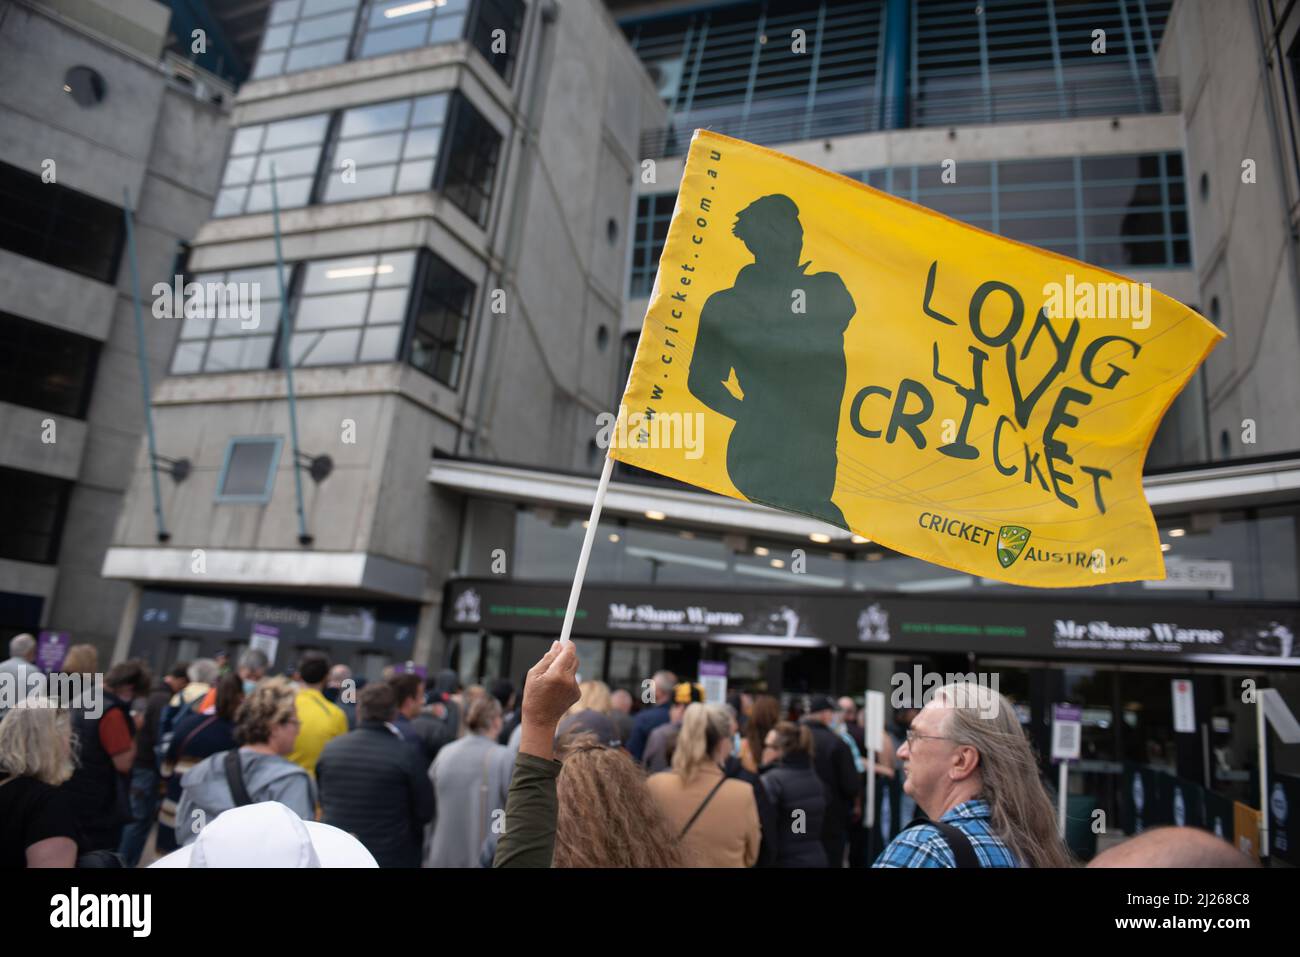 Melbourne, Australia. 30th March 2022. A fan attending the Shane Warne Memorial at the MCG waves a flag reading 'Long Live Cricket'. Credit: Jay Kogler/Alamy Live News Stock Photo